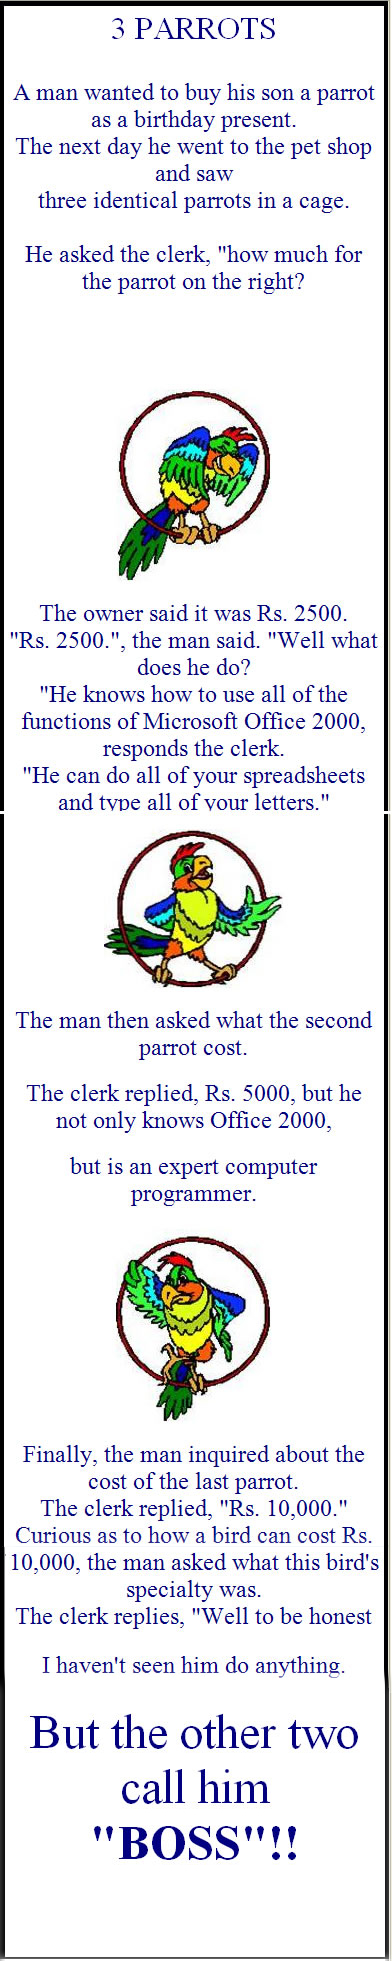 There are three parrots which are trained on computer and the owner of the shop explains. 1. The first parrot is expert in sending mails thru computer